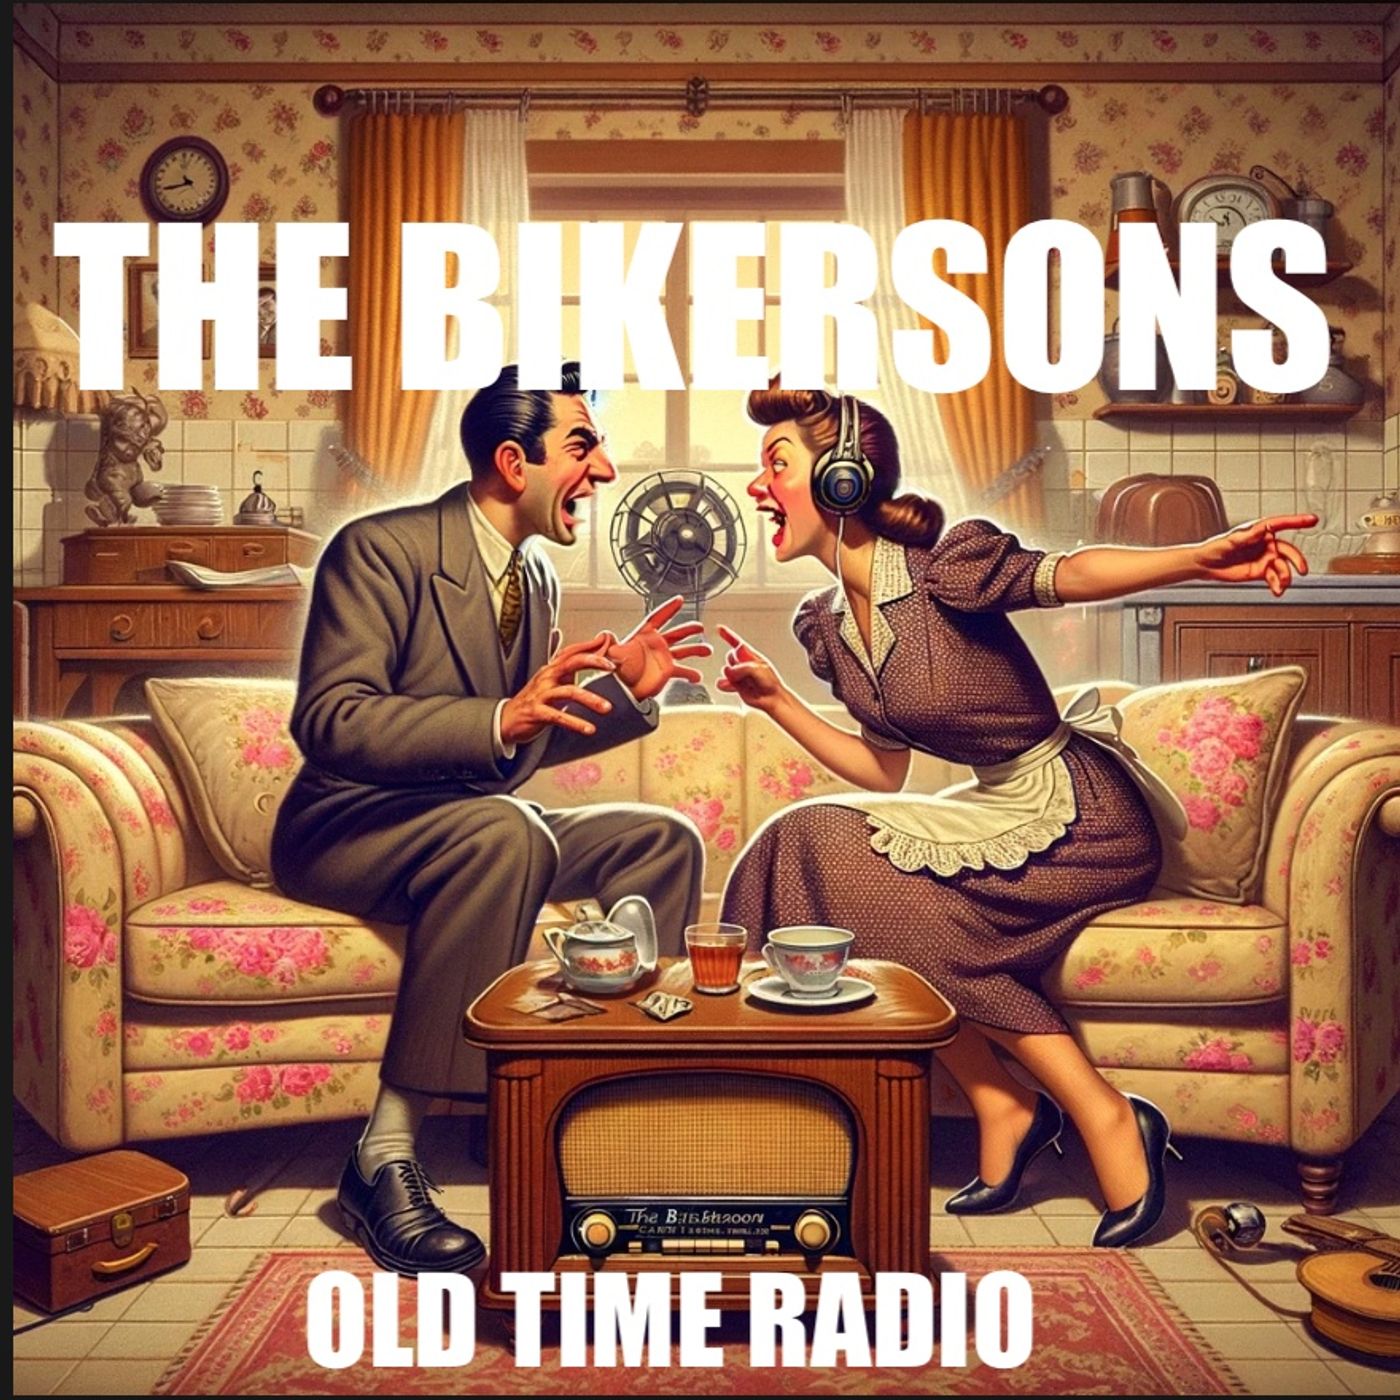 ep an episode of The Bickersons - Old Time Radio